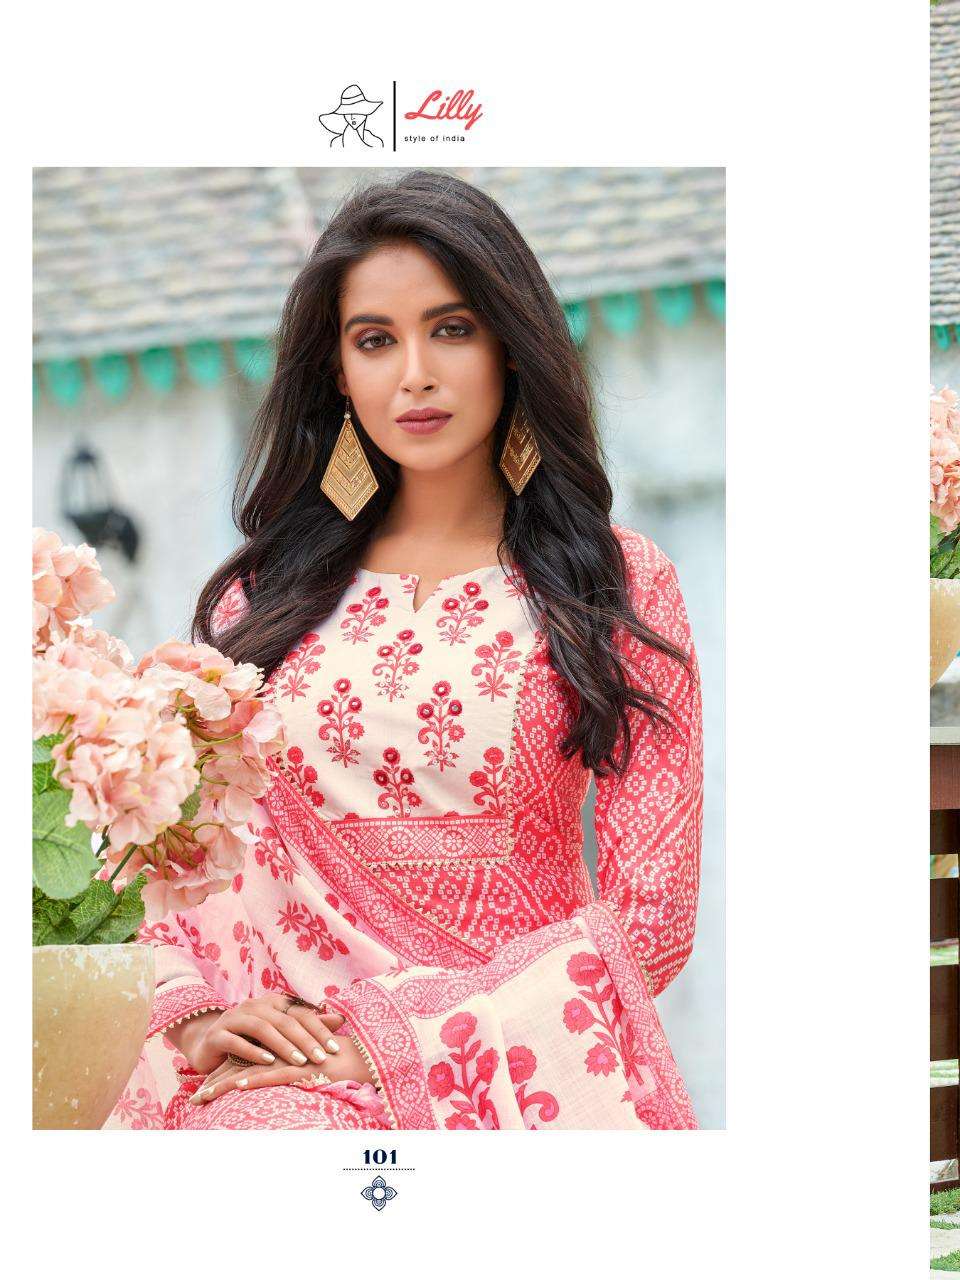 SAKIRA BY LILLY 101 TO 104 SERIES BEAUTIFUL SUITS COLORFUL STYLISH FANCY CASUAL WEAR & ETHNIC WEAR LINEN COTTON PRINT DRESSES AT WHOLESALE PRICE